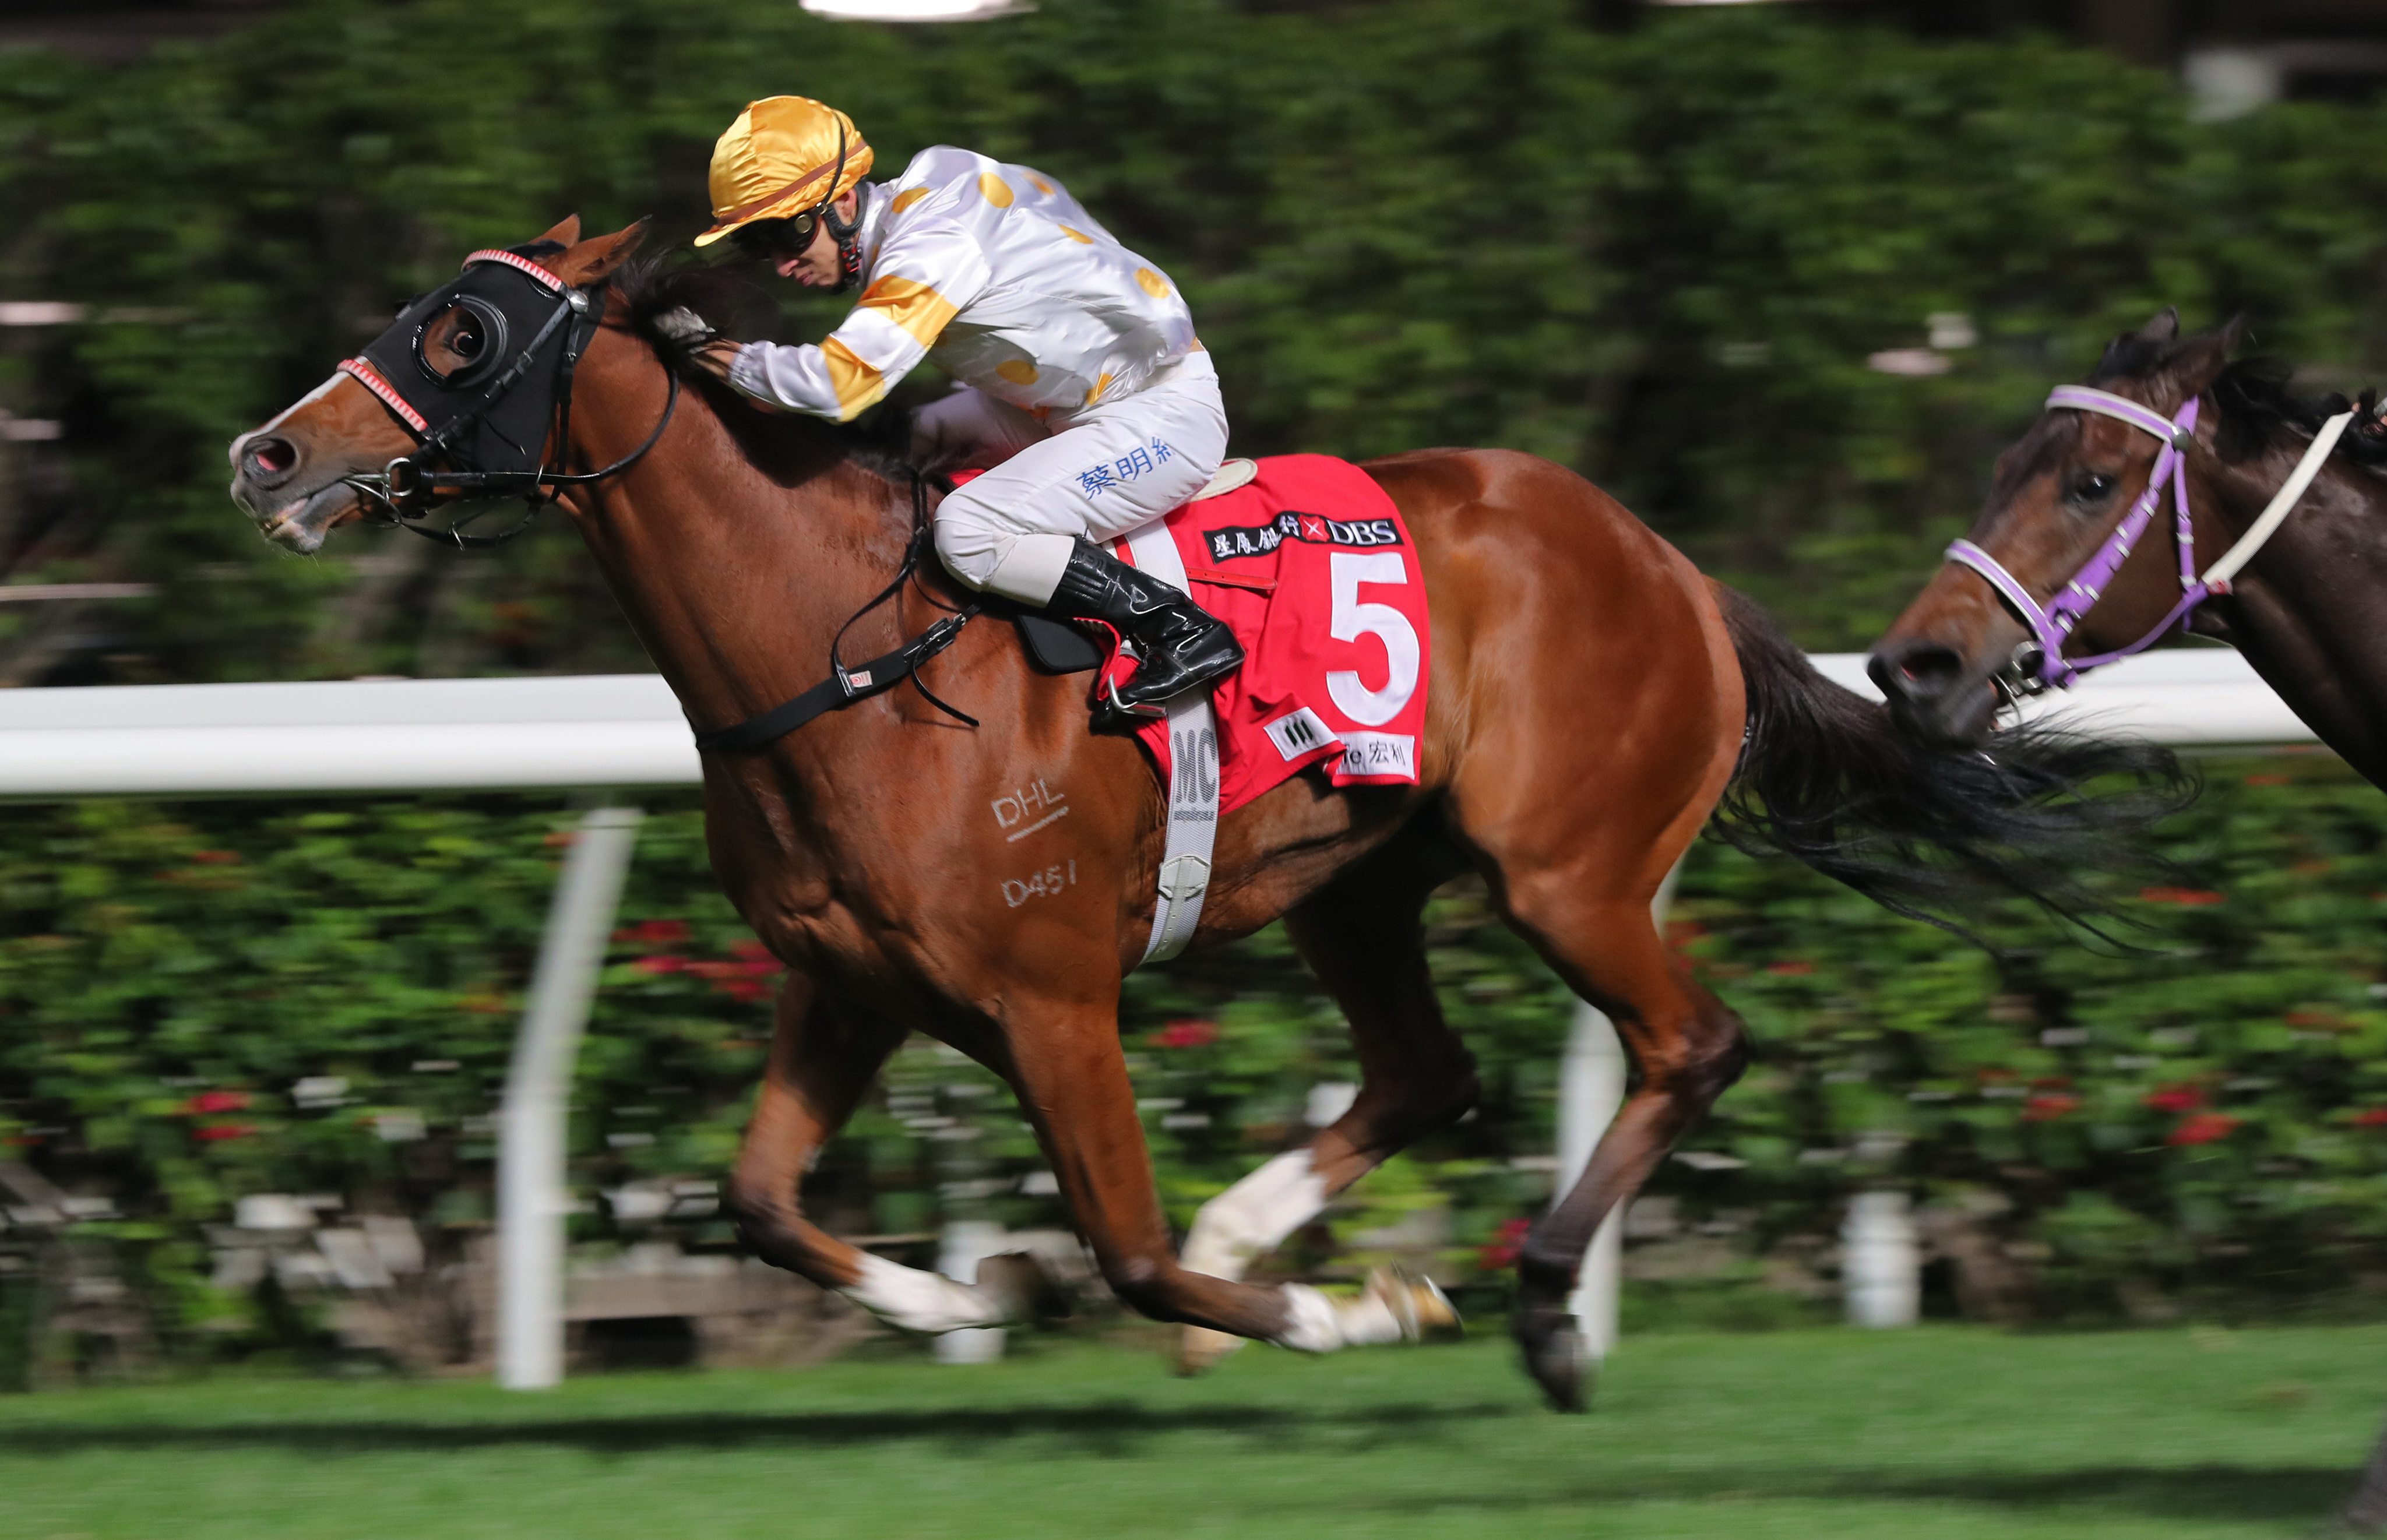 Joyful Win burns to victory at Happy Valley last month. Photo: Kenneth Chan